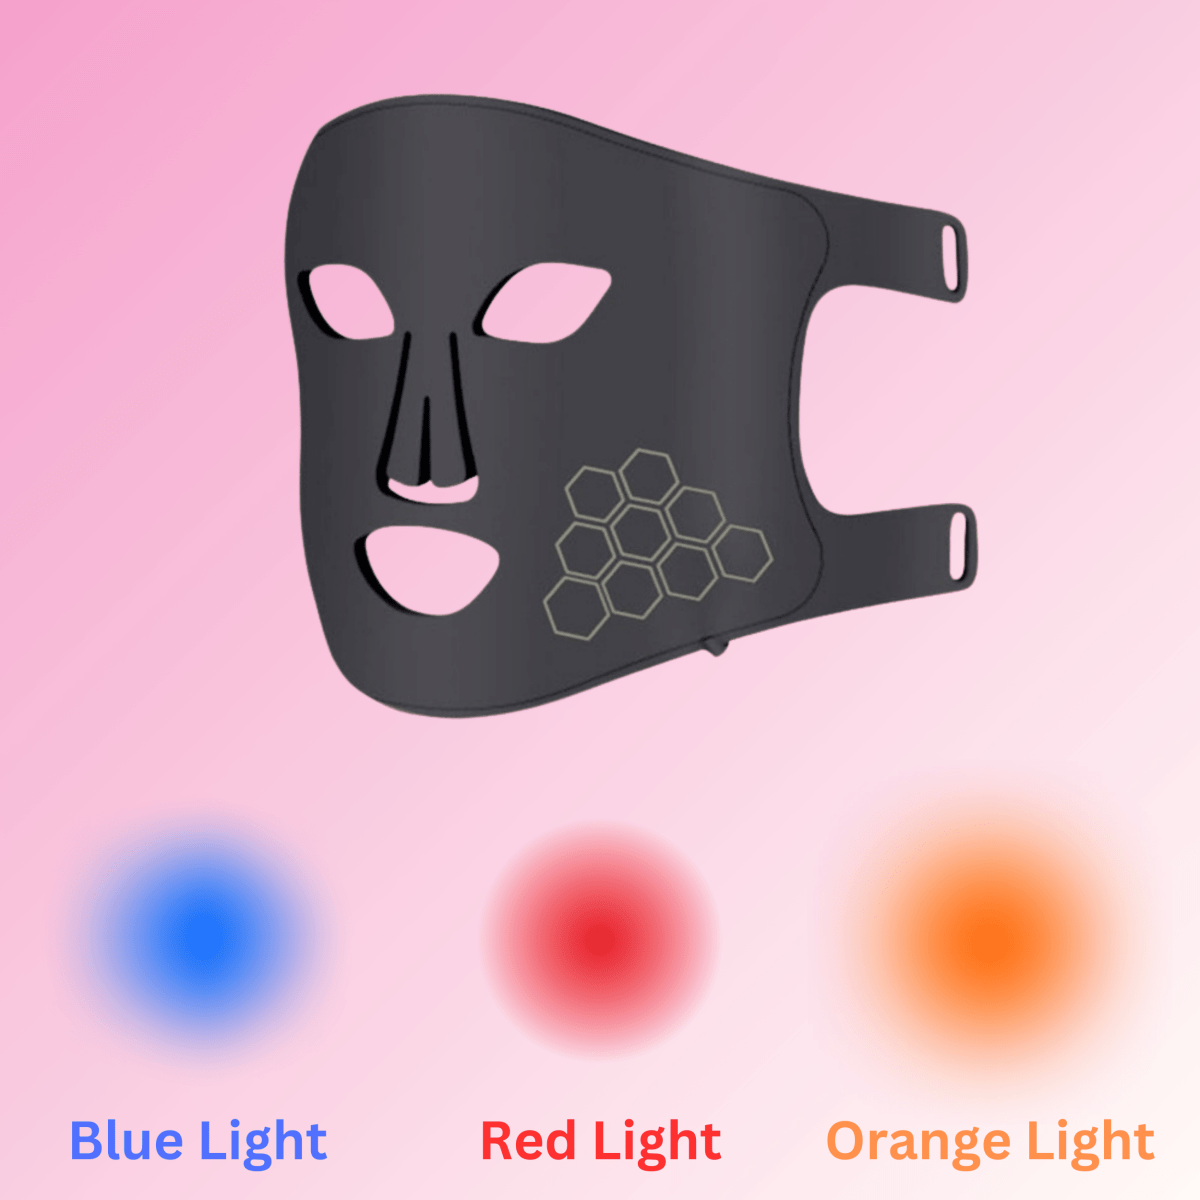 Showing the different LED light settings of the Infrared LED therapy mask, blue light, redlight and orange light